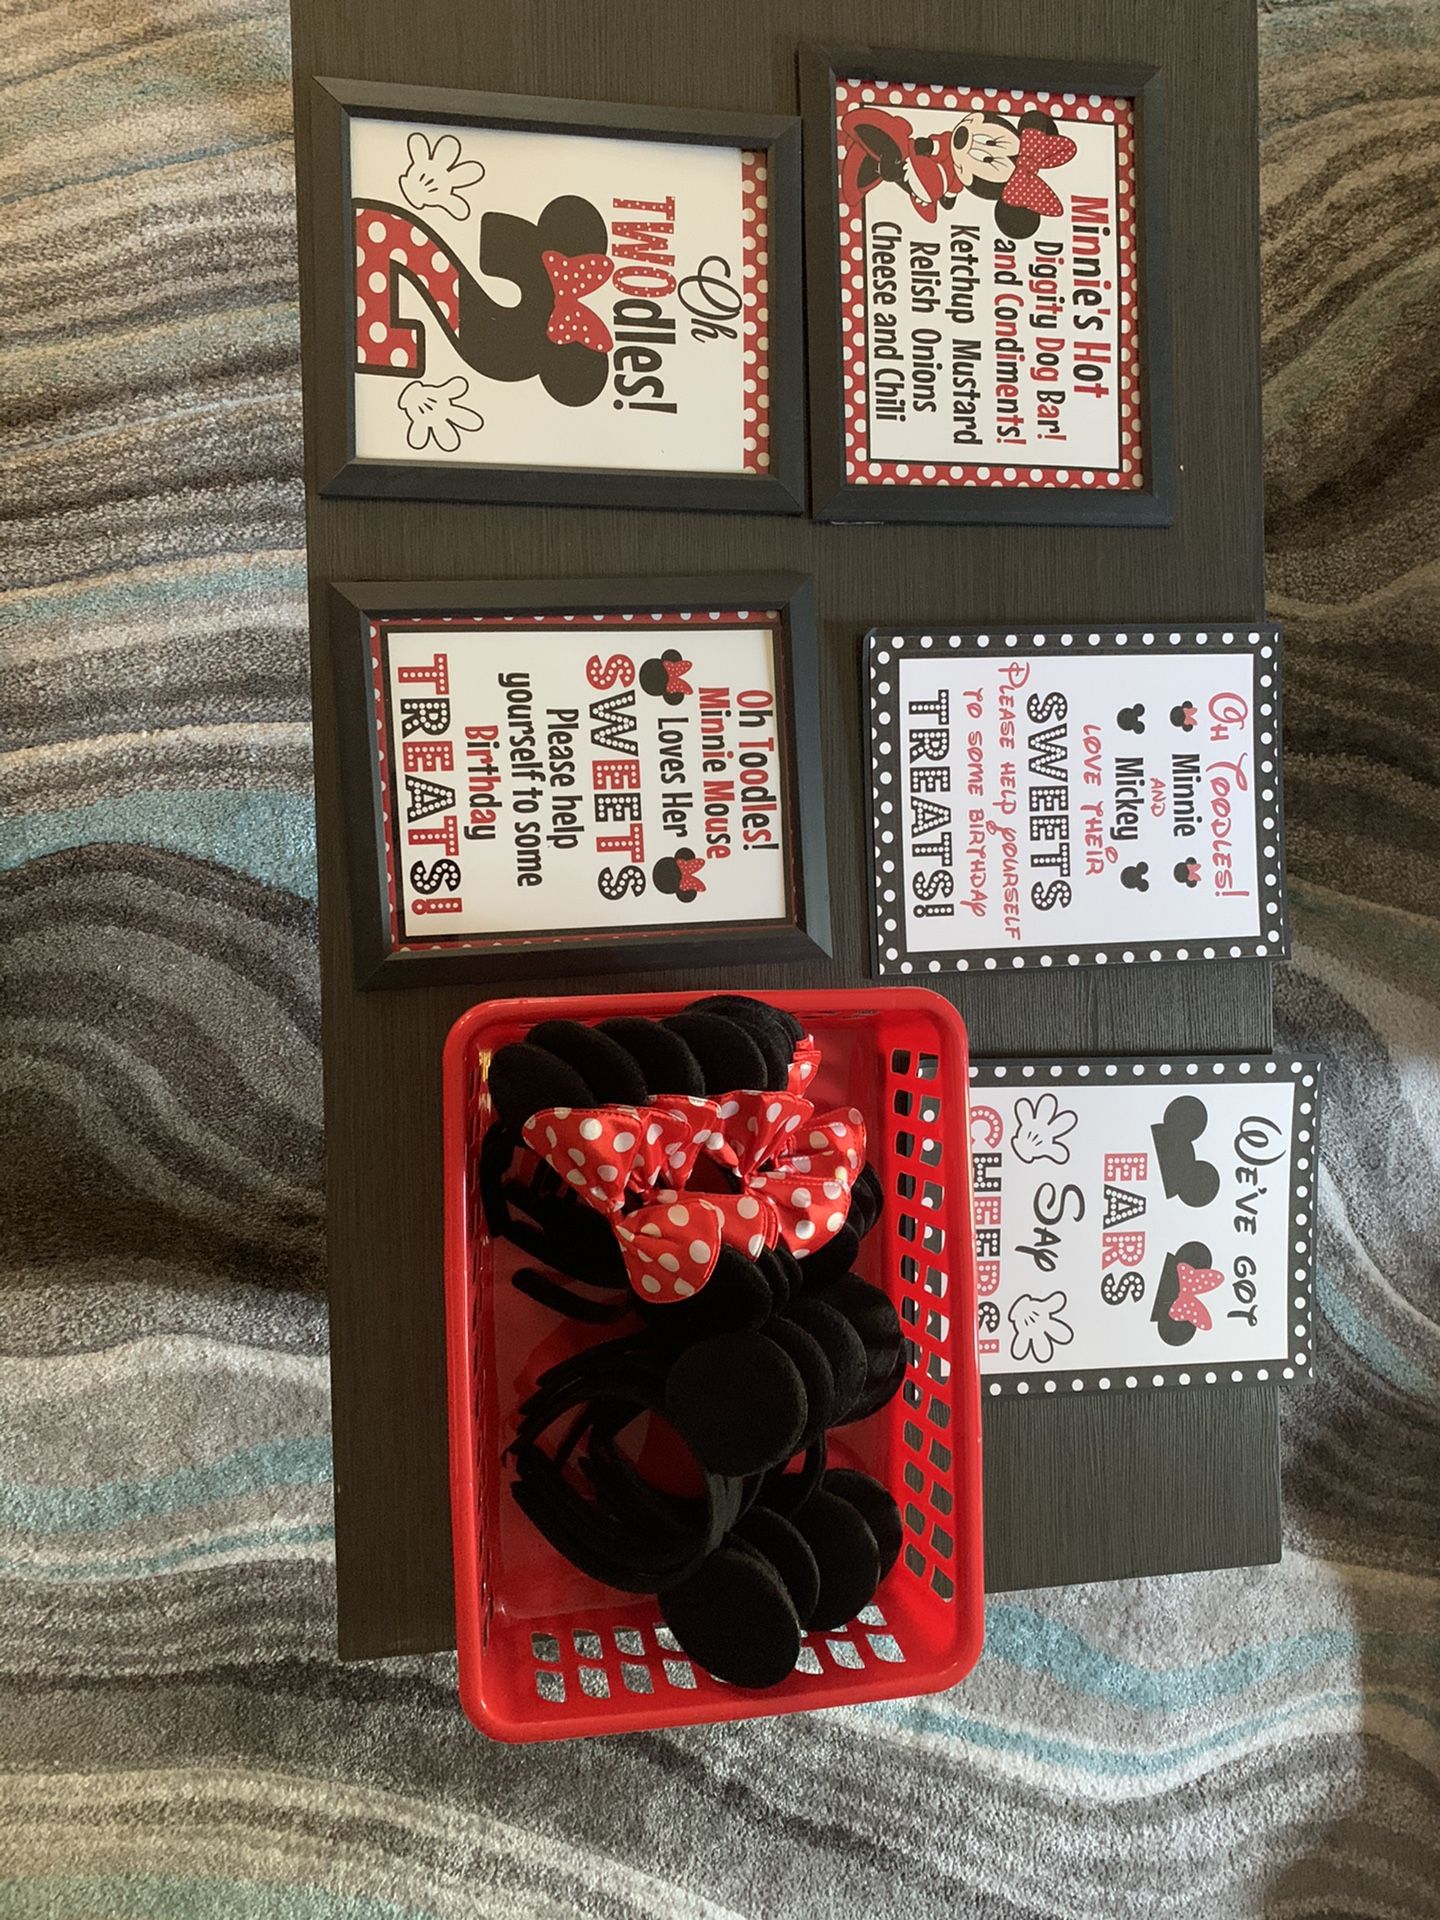 Minnie Mouse Birthday Decorations